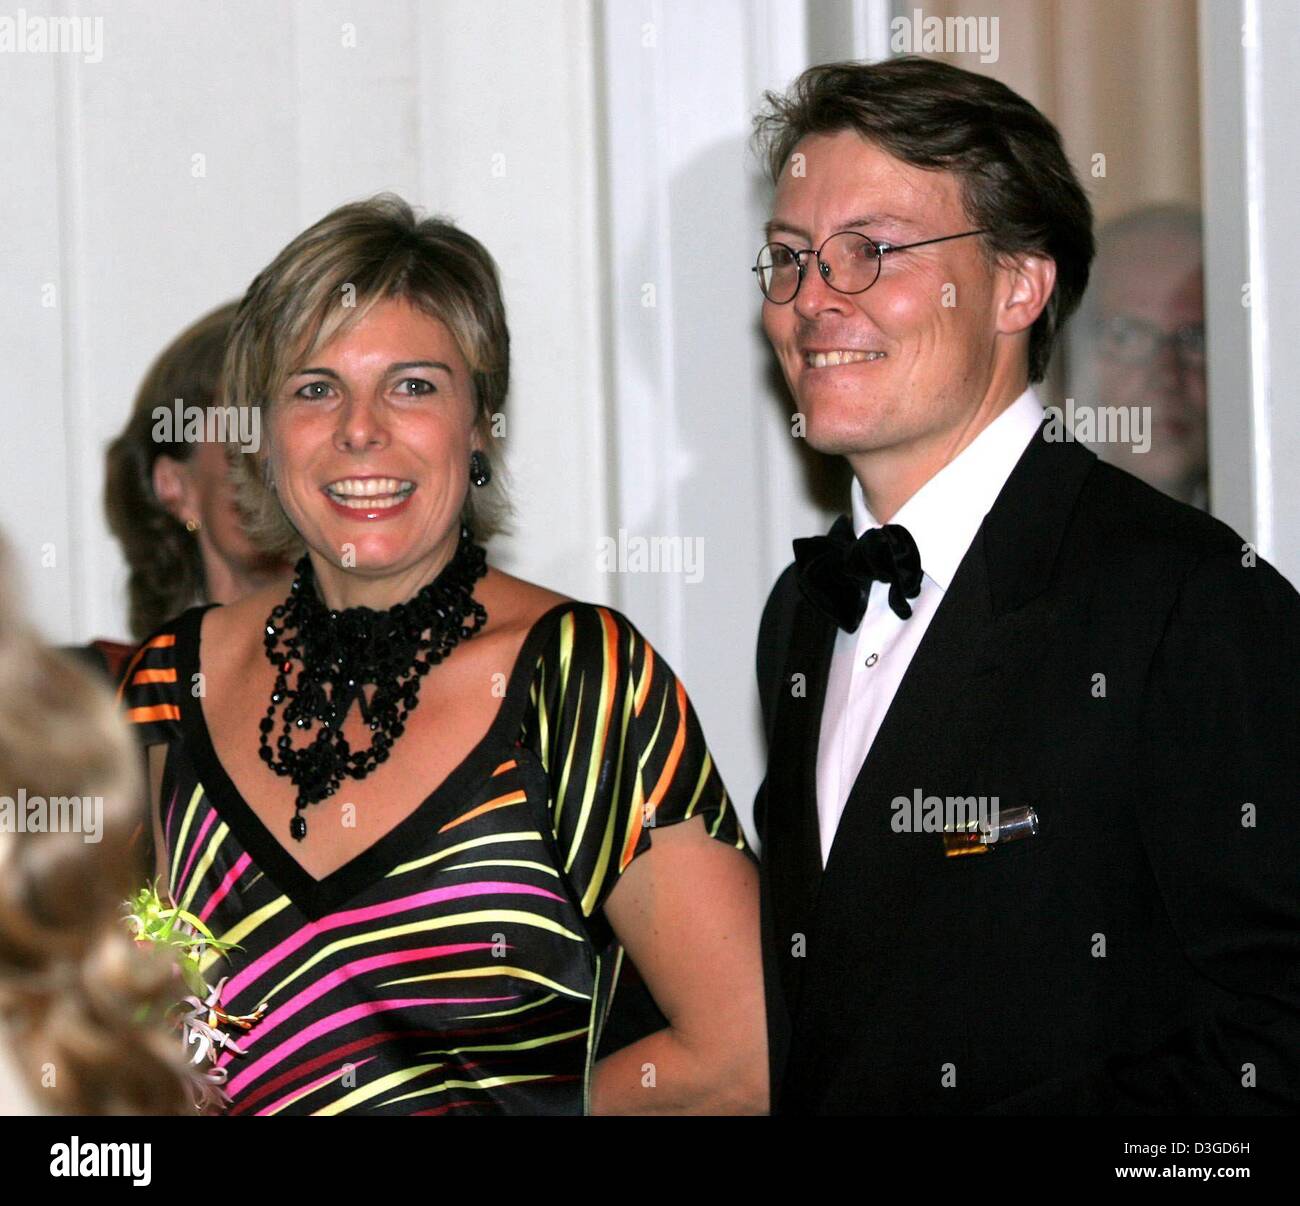 (dpa) - Princess Laurentien and Prince Constantijn of the Netherlands smile as they arrive for the opening of the Golden Children's Book Week at the theatre at the Leidseplein in Amsterdam, the Netherlands, 5 October 2004. Stock Photo